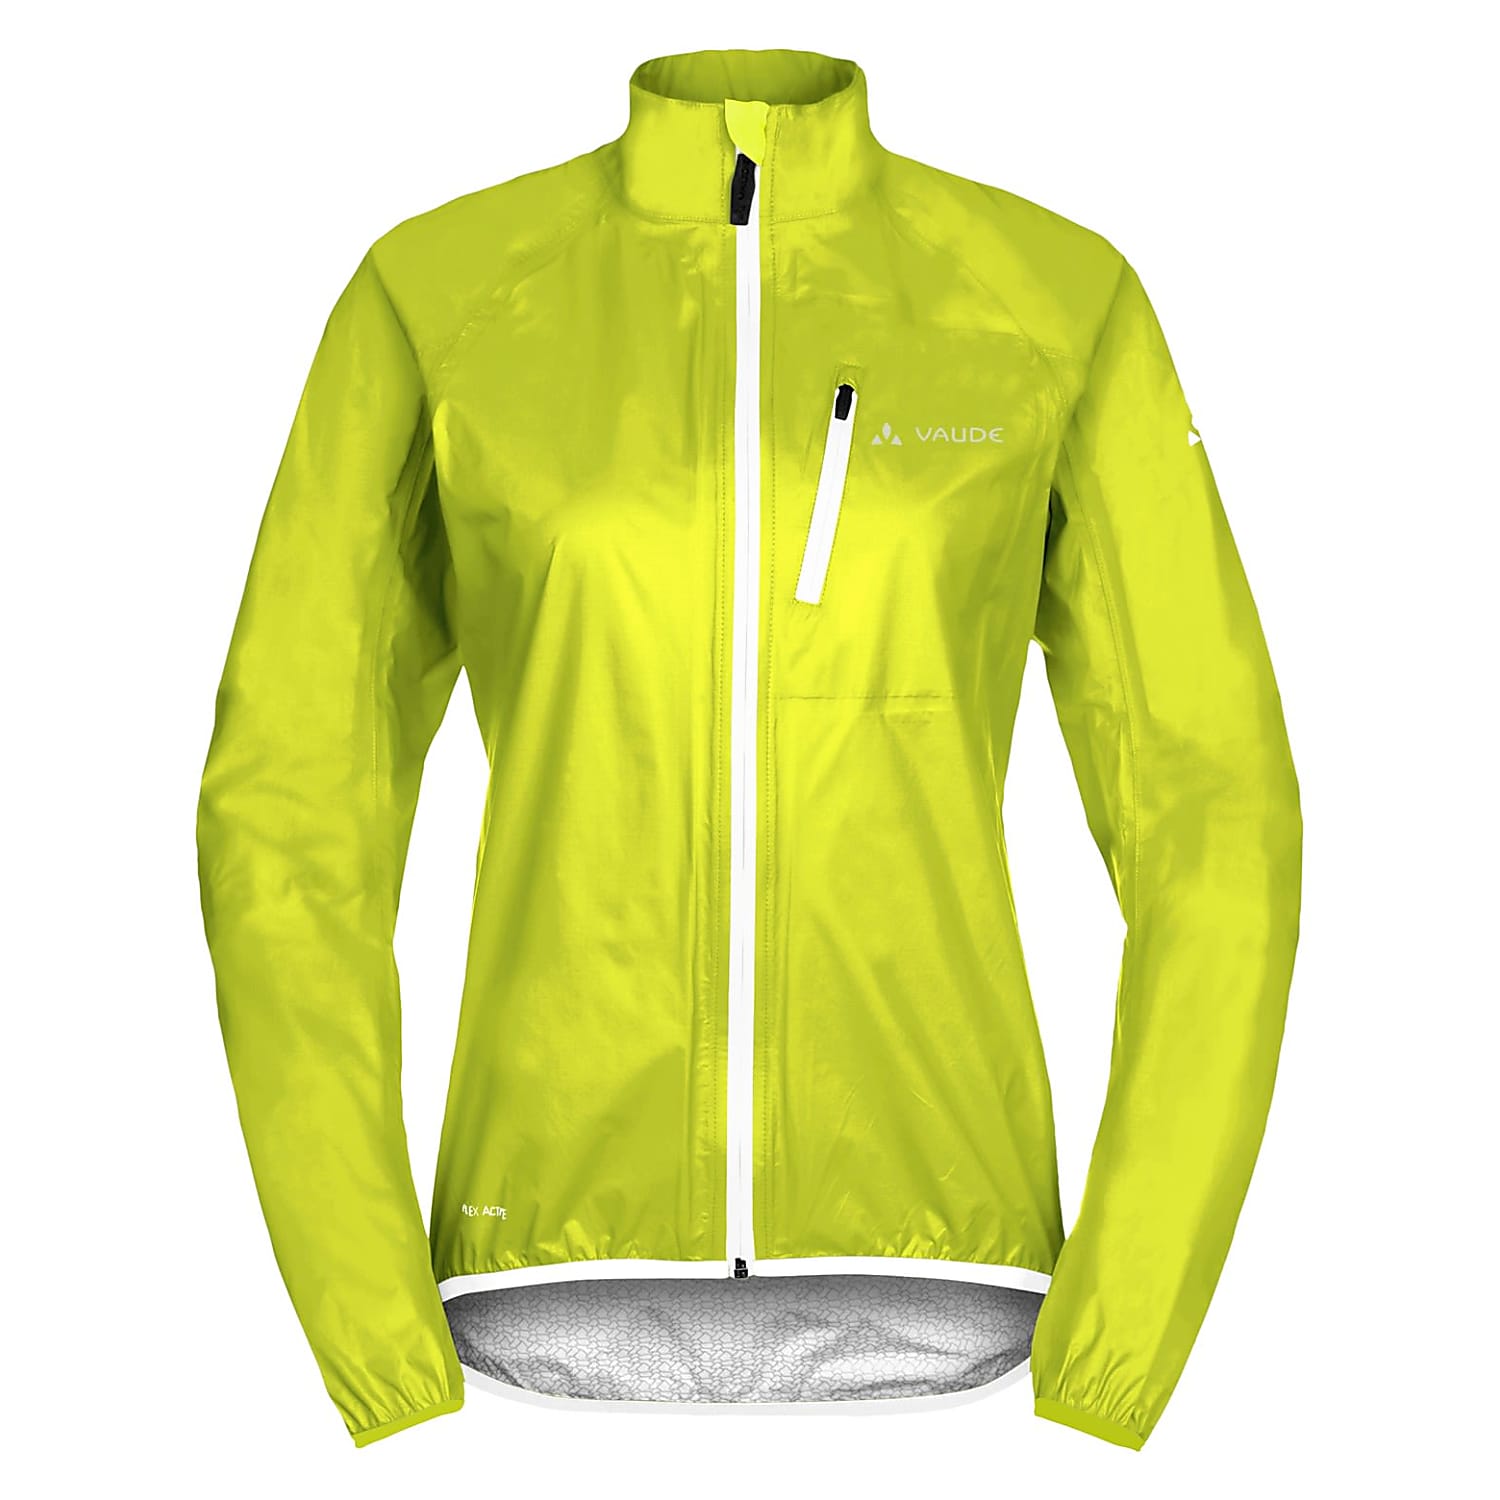 Vaude WOMENS DROP III, Bright JACKET cheap Green shipping - Fast and